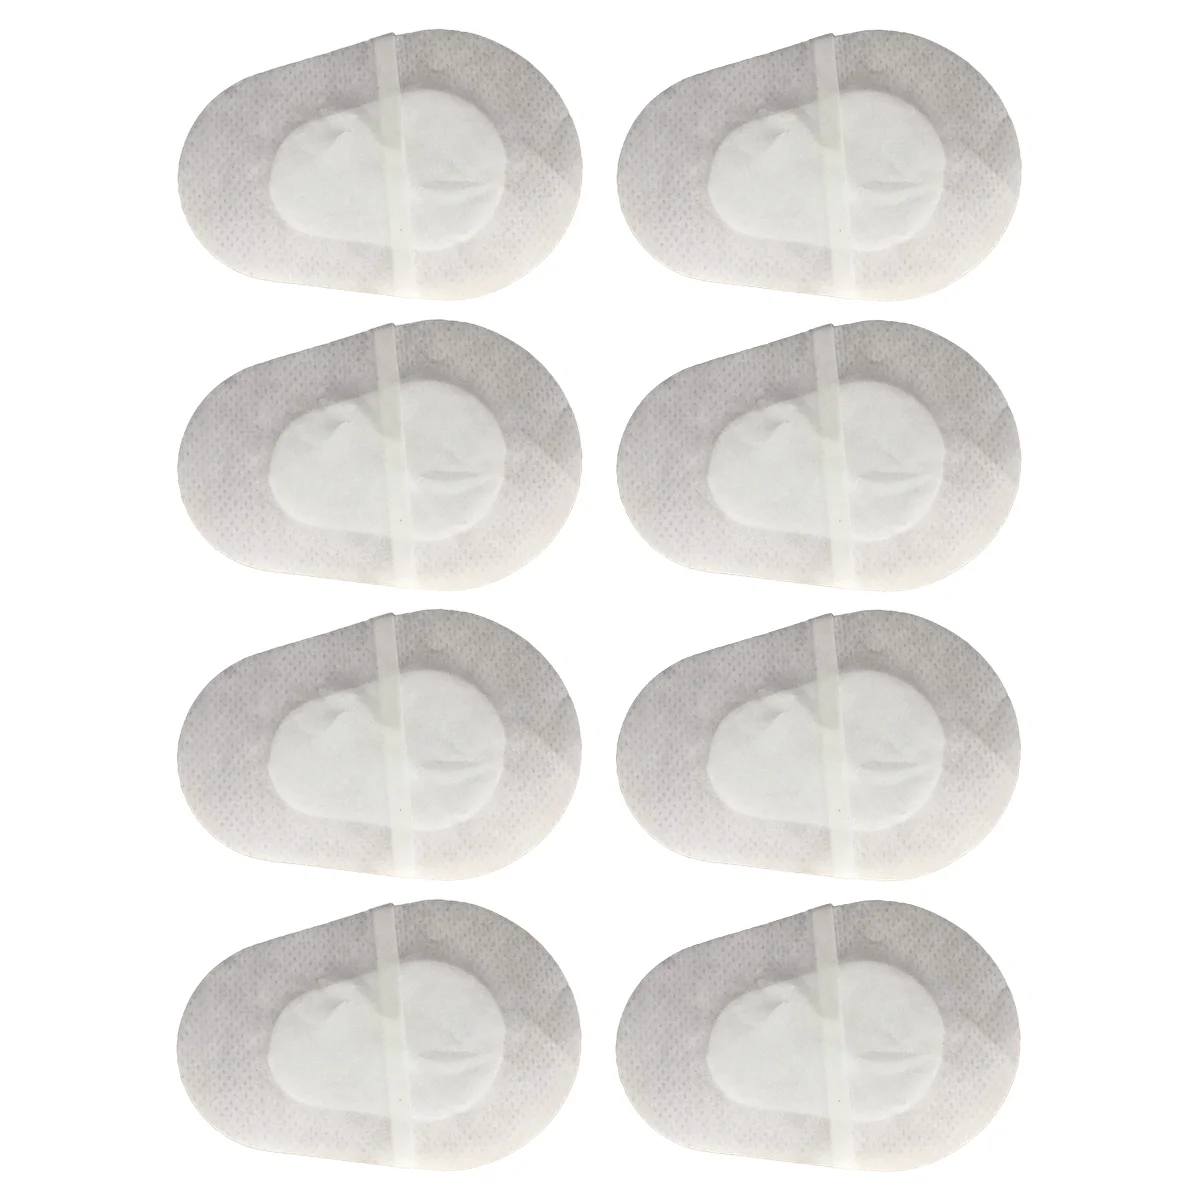 

Eye Patch Patches Pads Adults Adhesive Sterile Stickers Pad Bandages Non Woven Wound Dressings Self Oval Kids Nonwoven First Aid